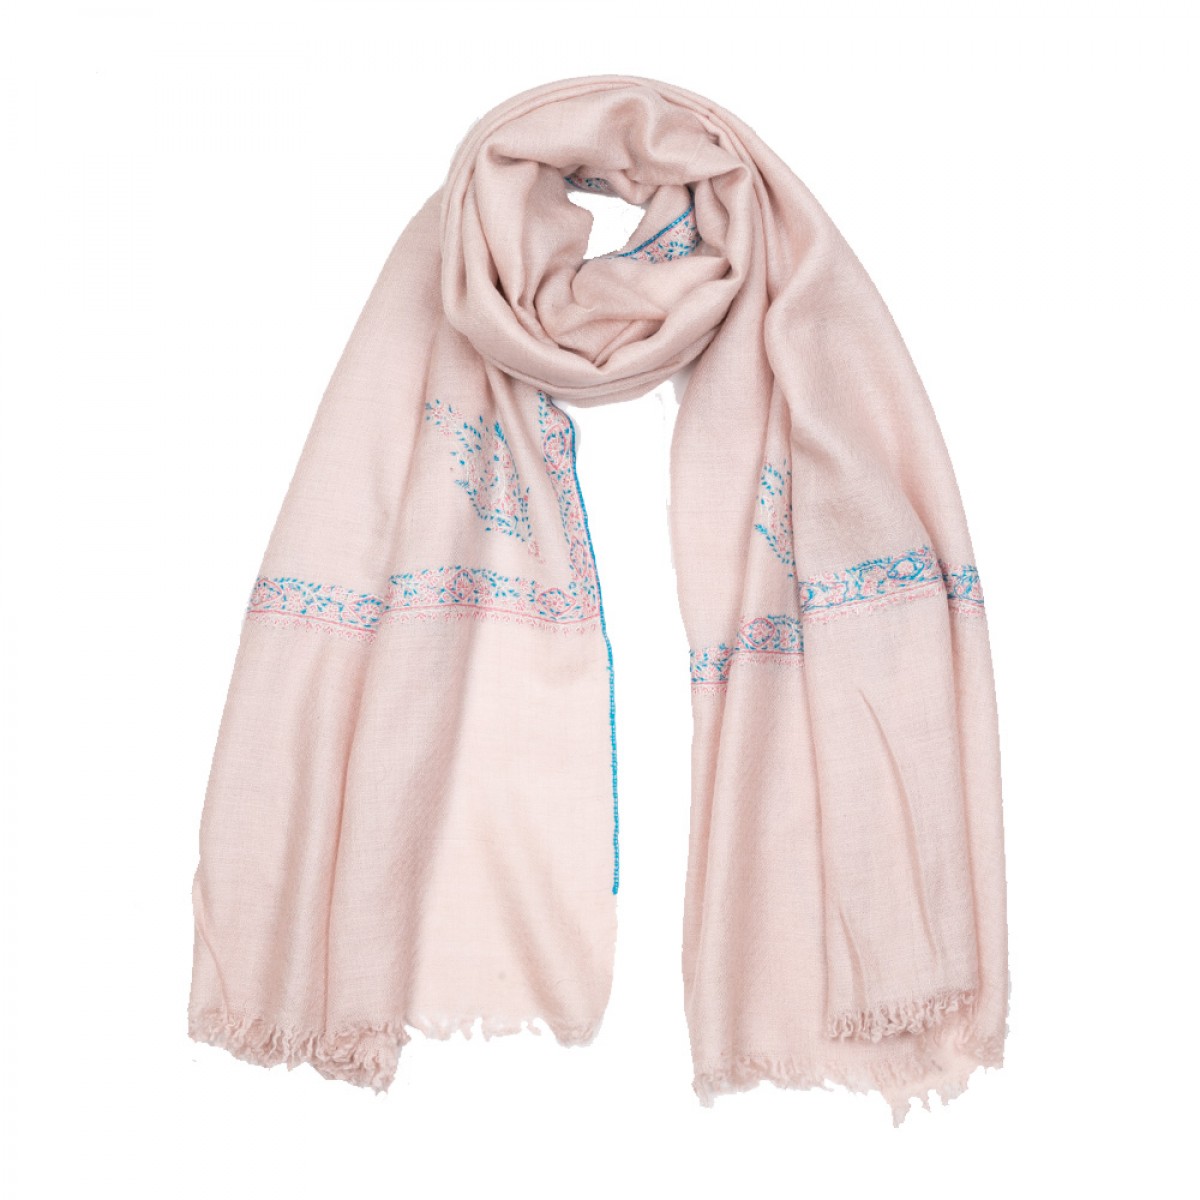 Embroidered Pashmina Stole -  Light Pink & Blue